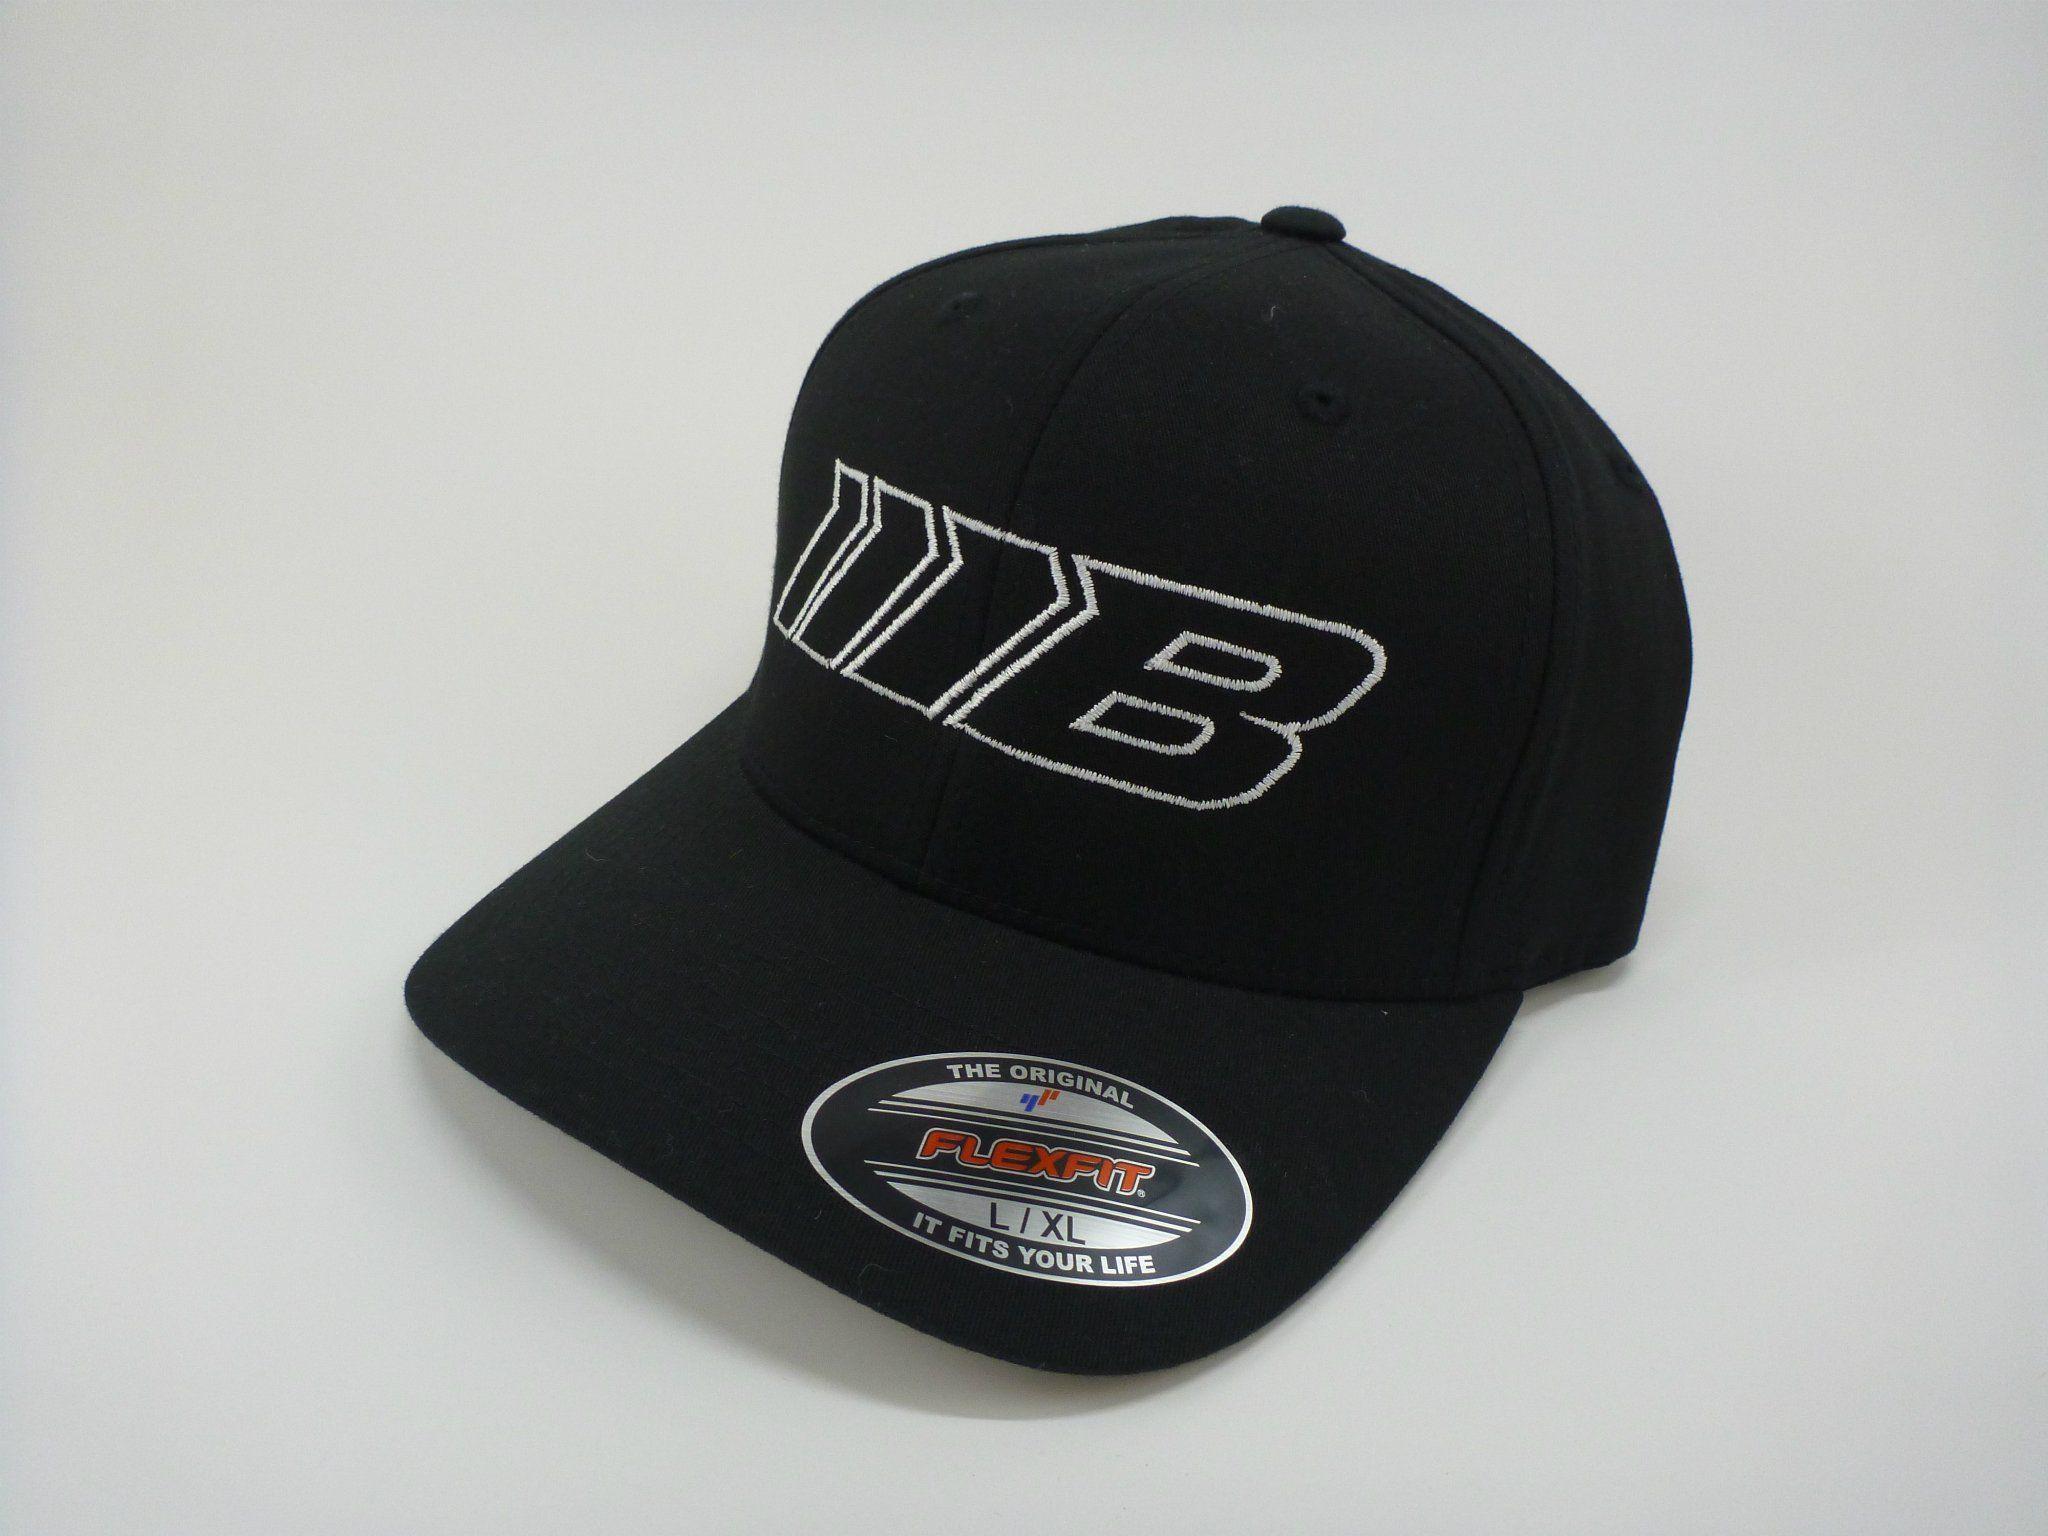 Green with White Outline Logo - Borg Motorsports Outline Logo Hat - Black with Green or White Logo